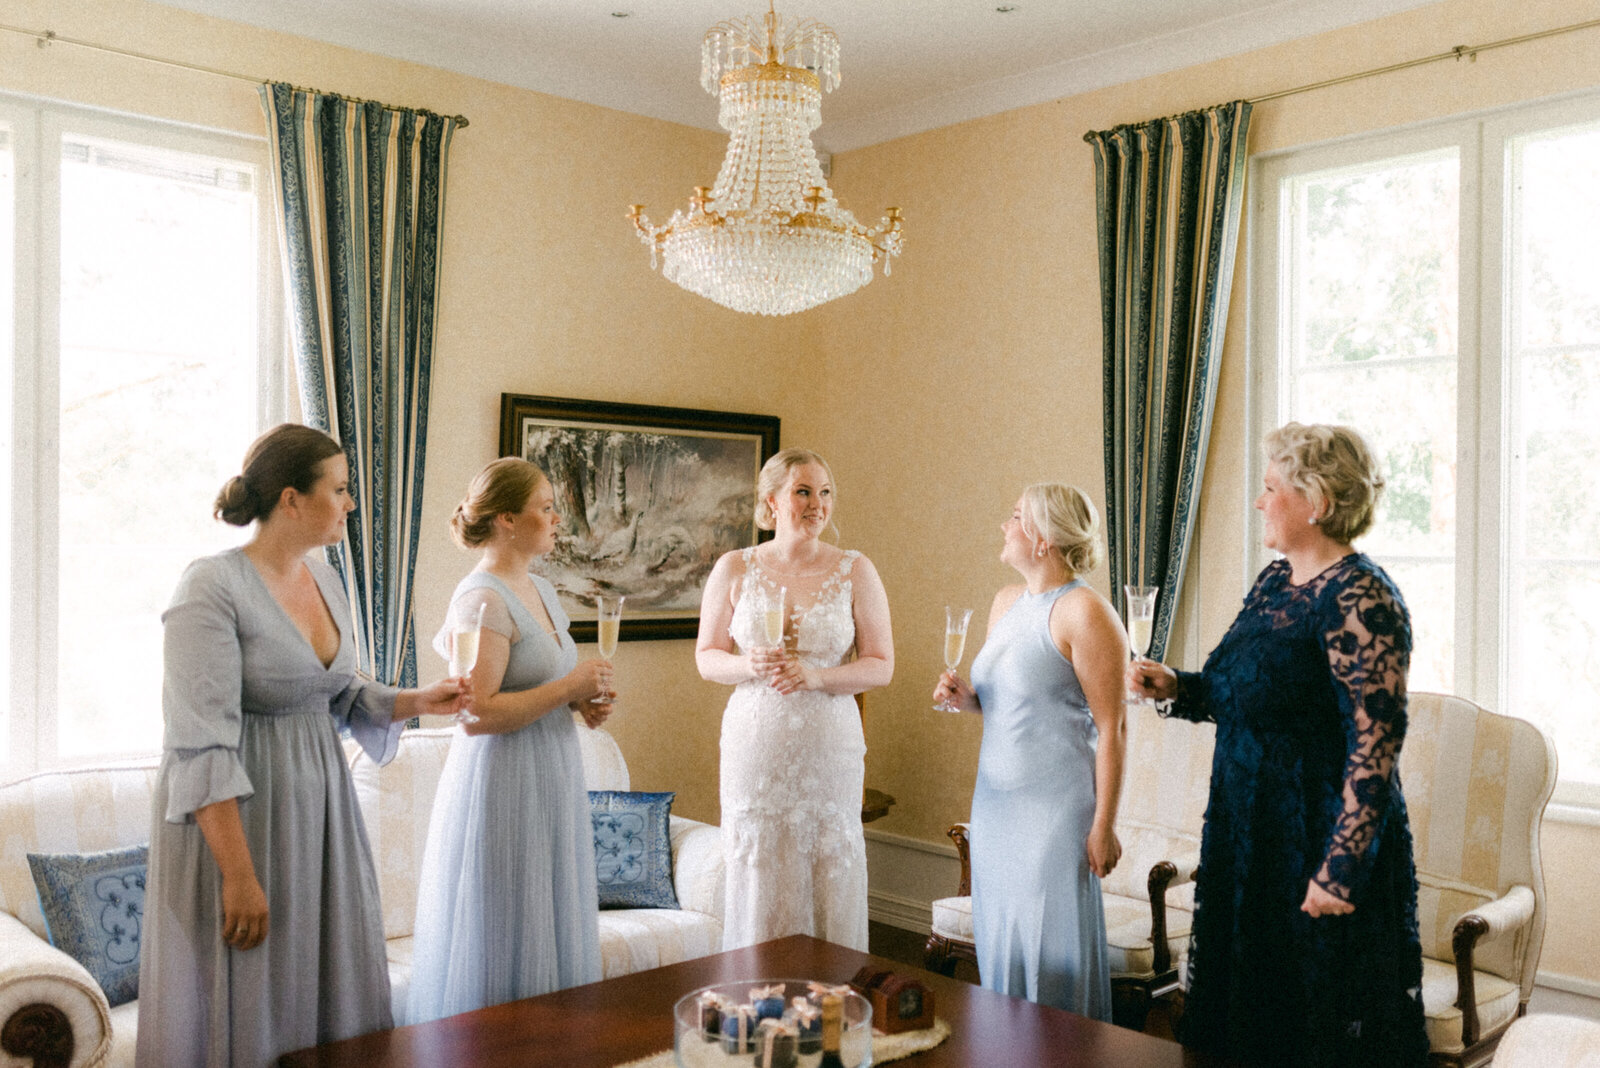 The bridal team toasting for the bride in an image photographed by wedding photographer Hannika Gabrielsson.